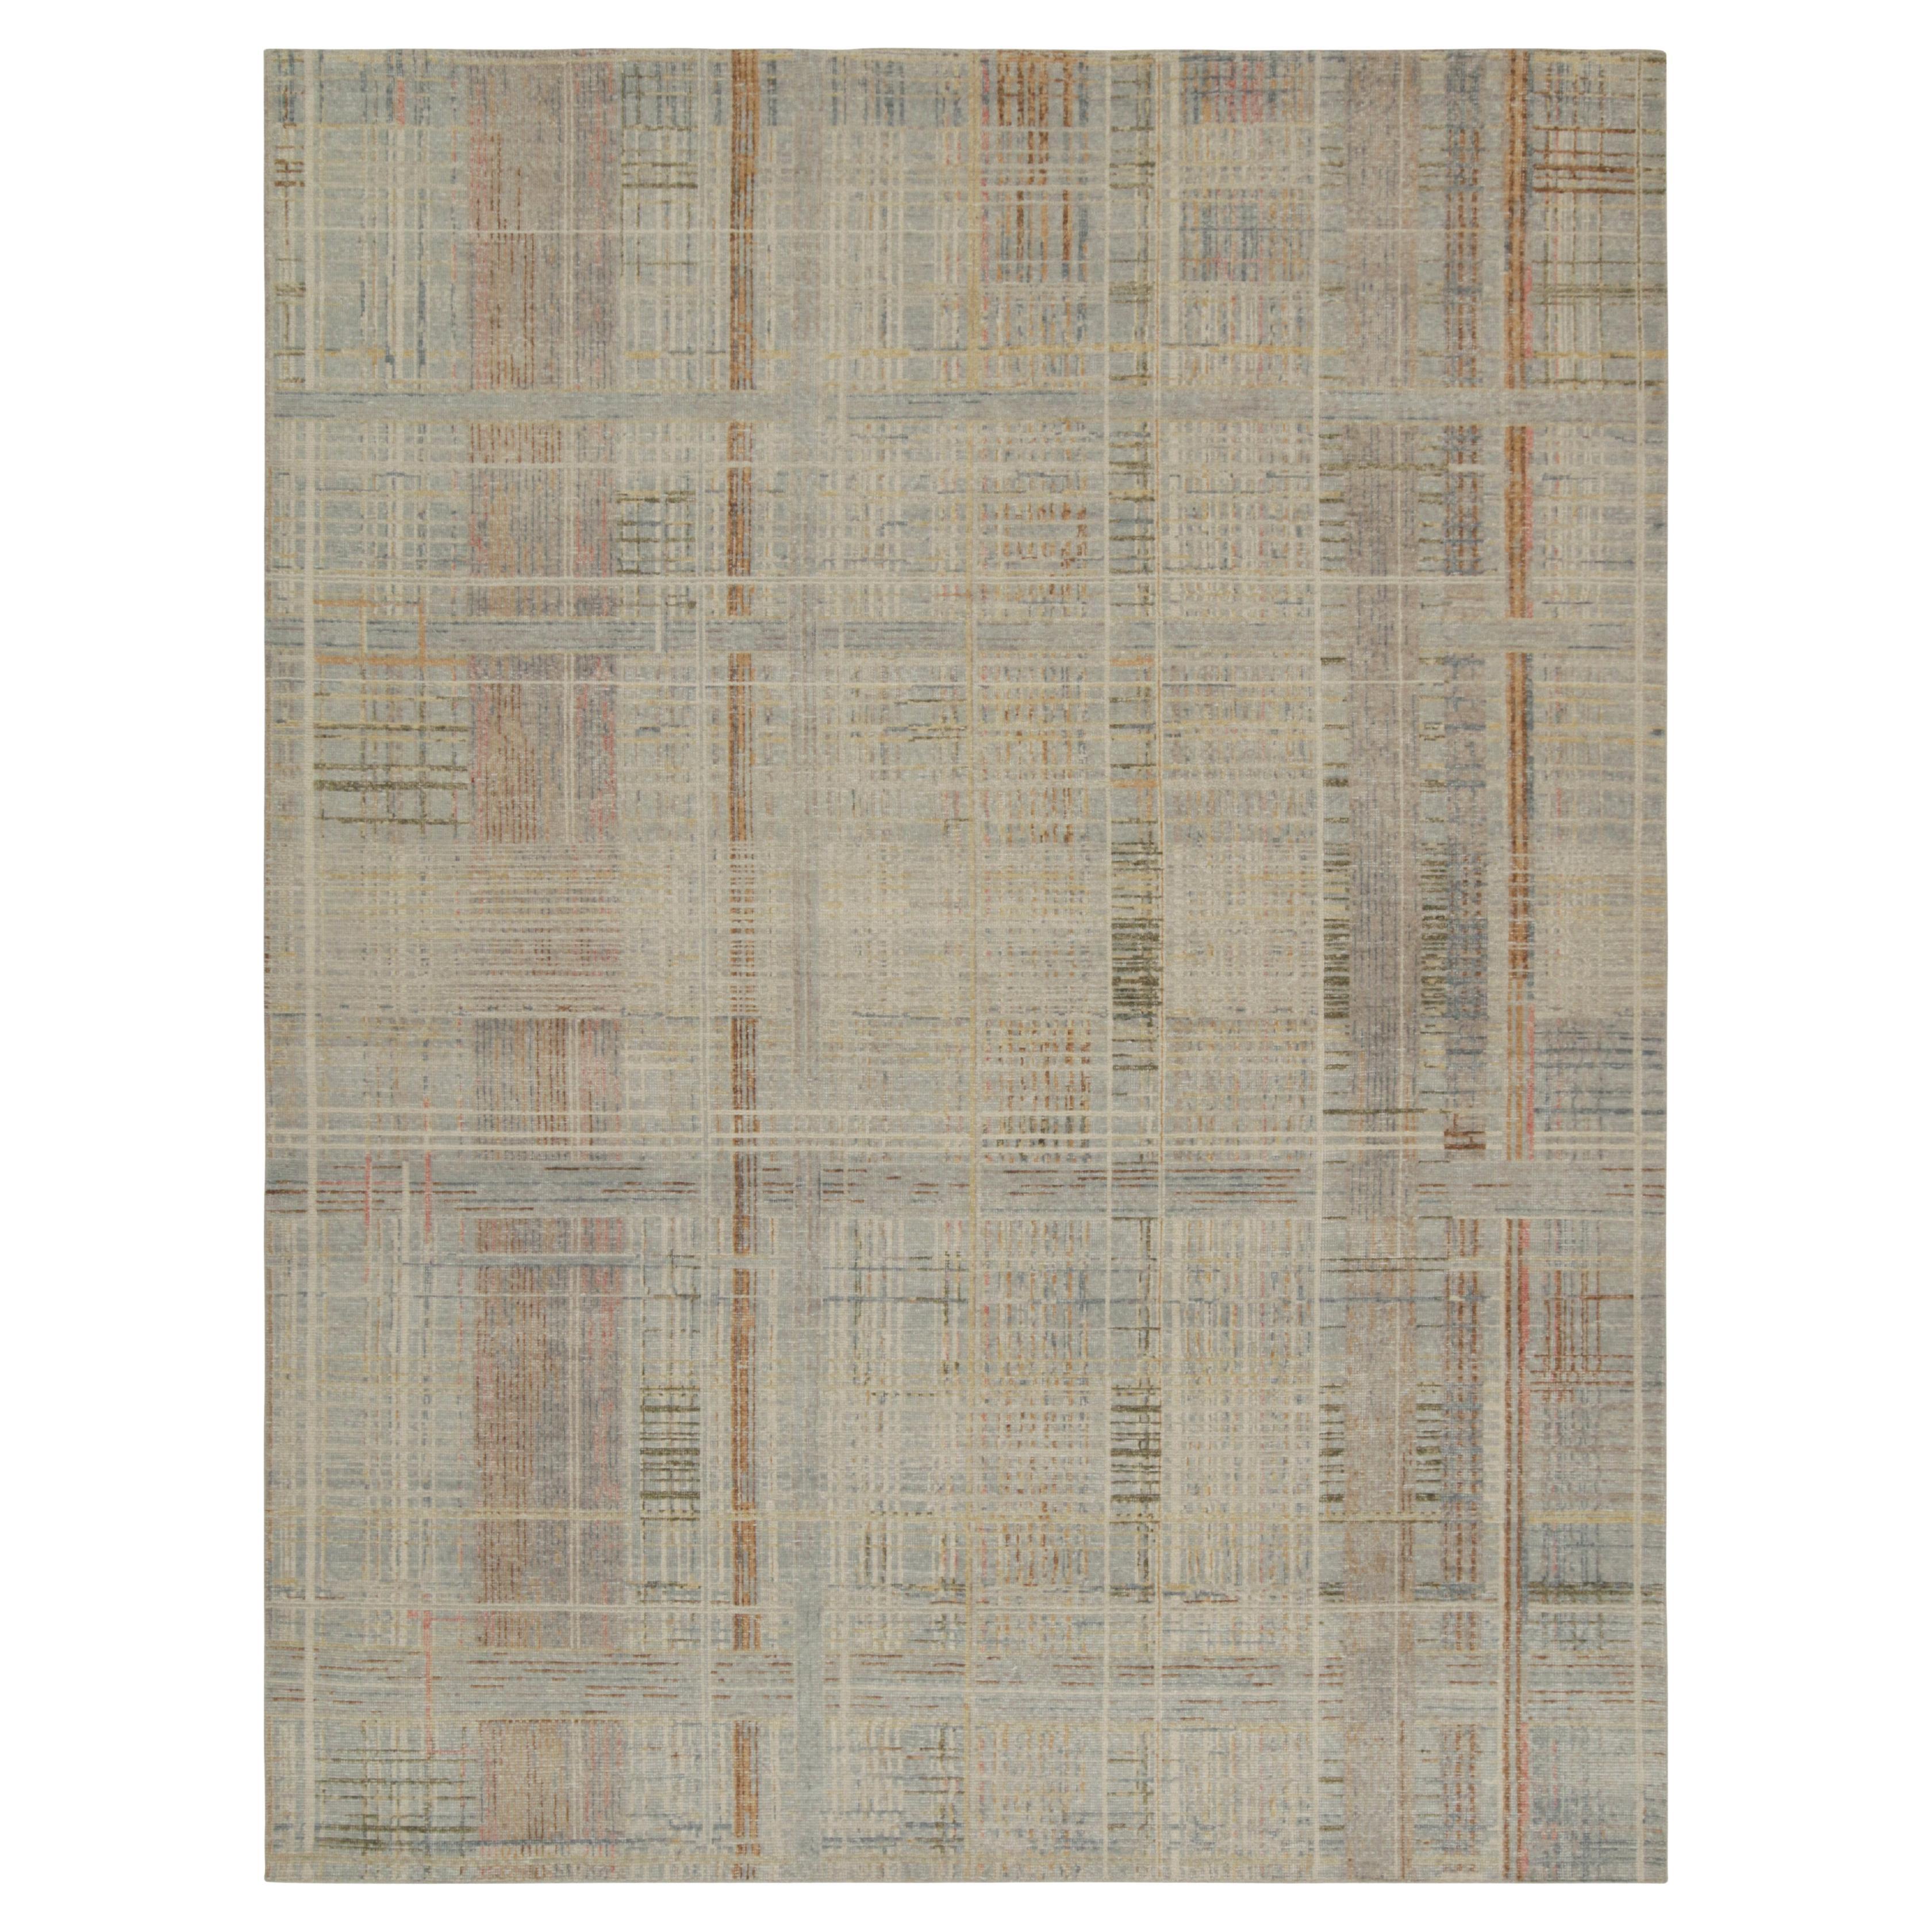 Rug & Kilim’s Distressed Style Abstract Rug in Polychromatic Geometric Pattern